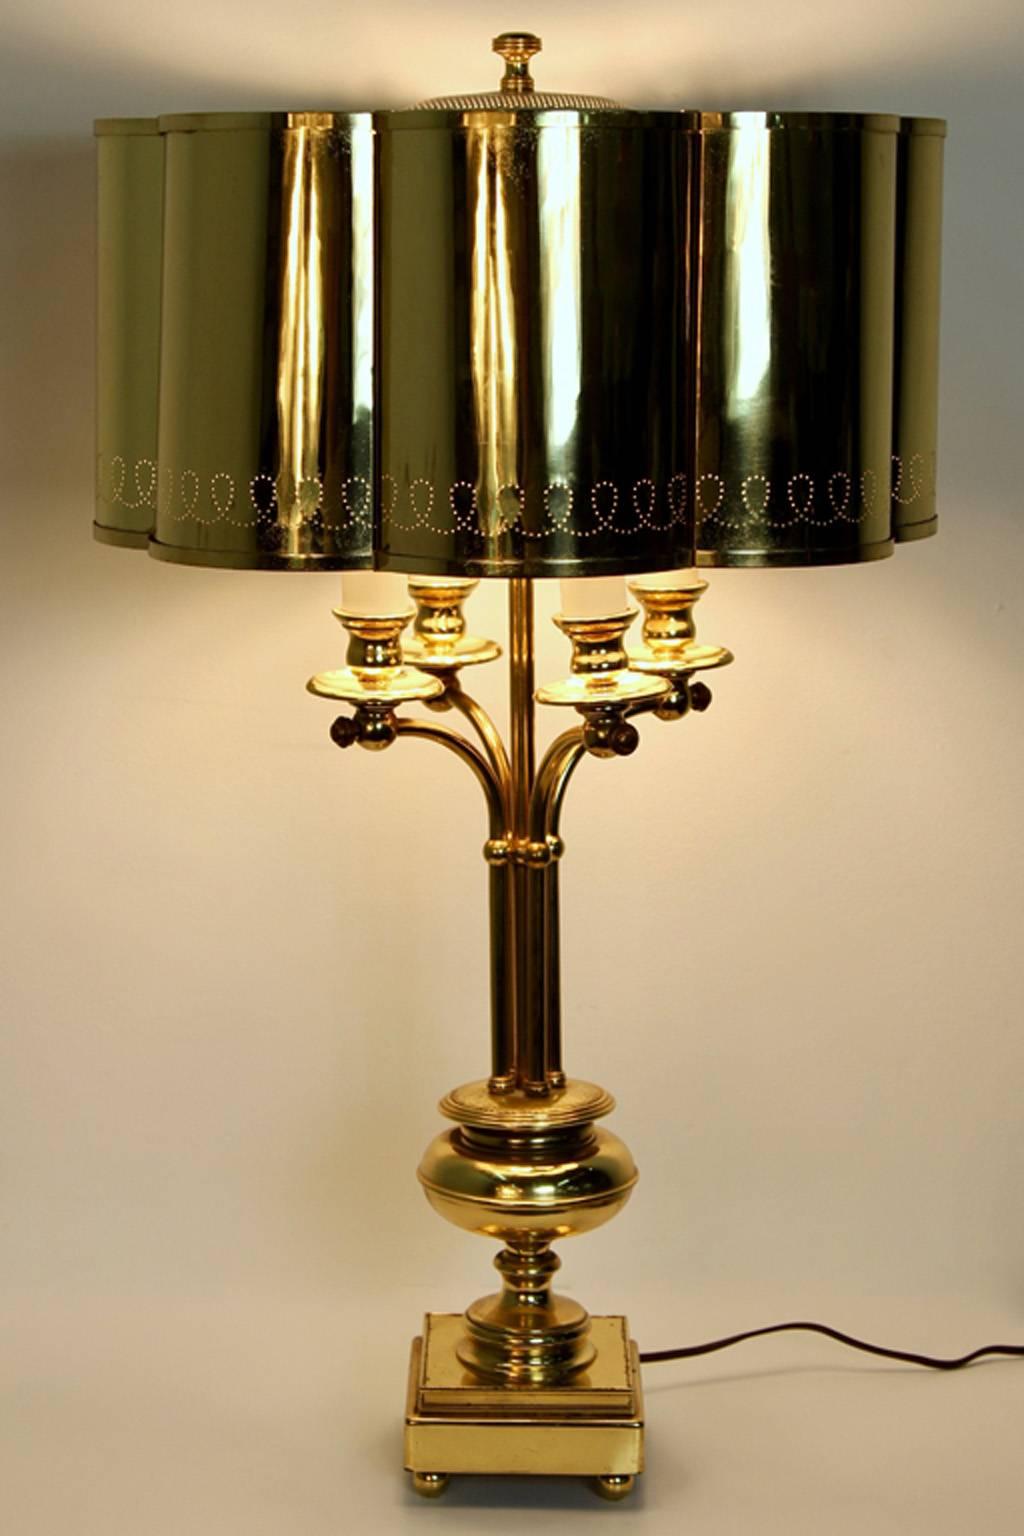 Wonderful Regency modern era table lamp in solid brass. Featuring a lobed shade, perforated decoration, and four sockets. In the manner of Finnish designer Paavo Tynell.